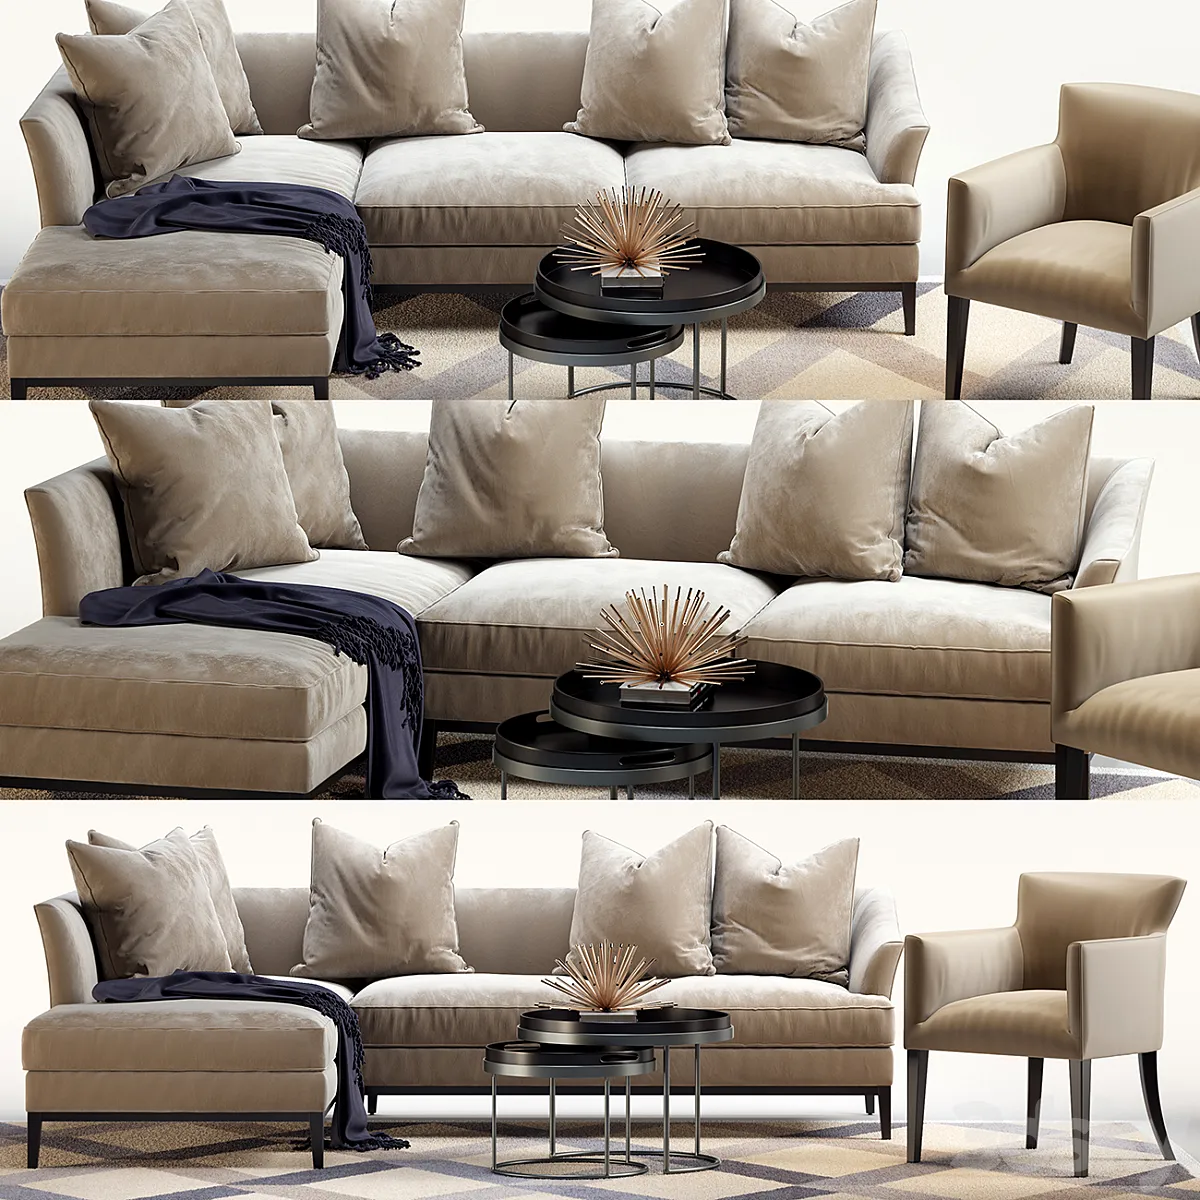 The sofa and chair company set 2 - Sofa - 3D model